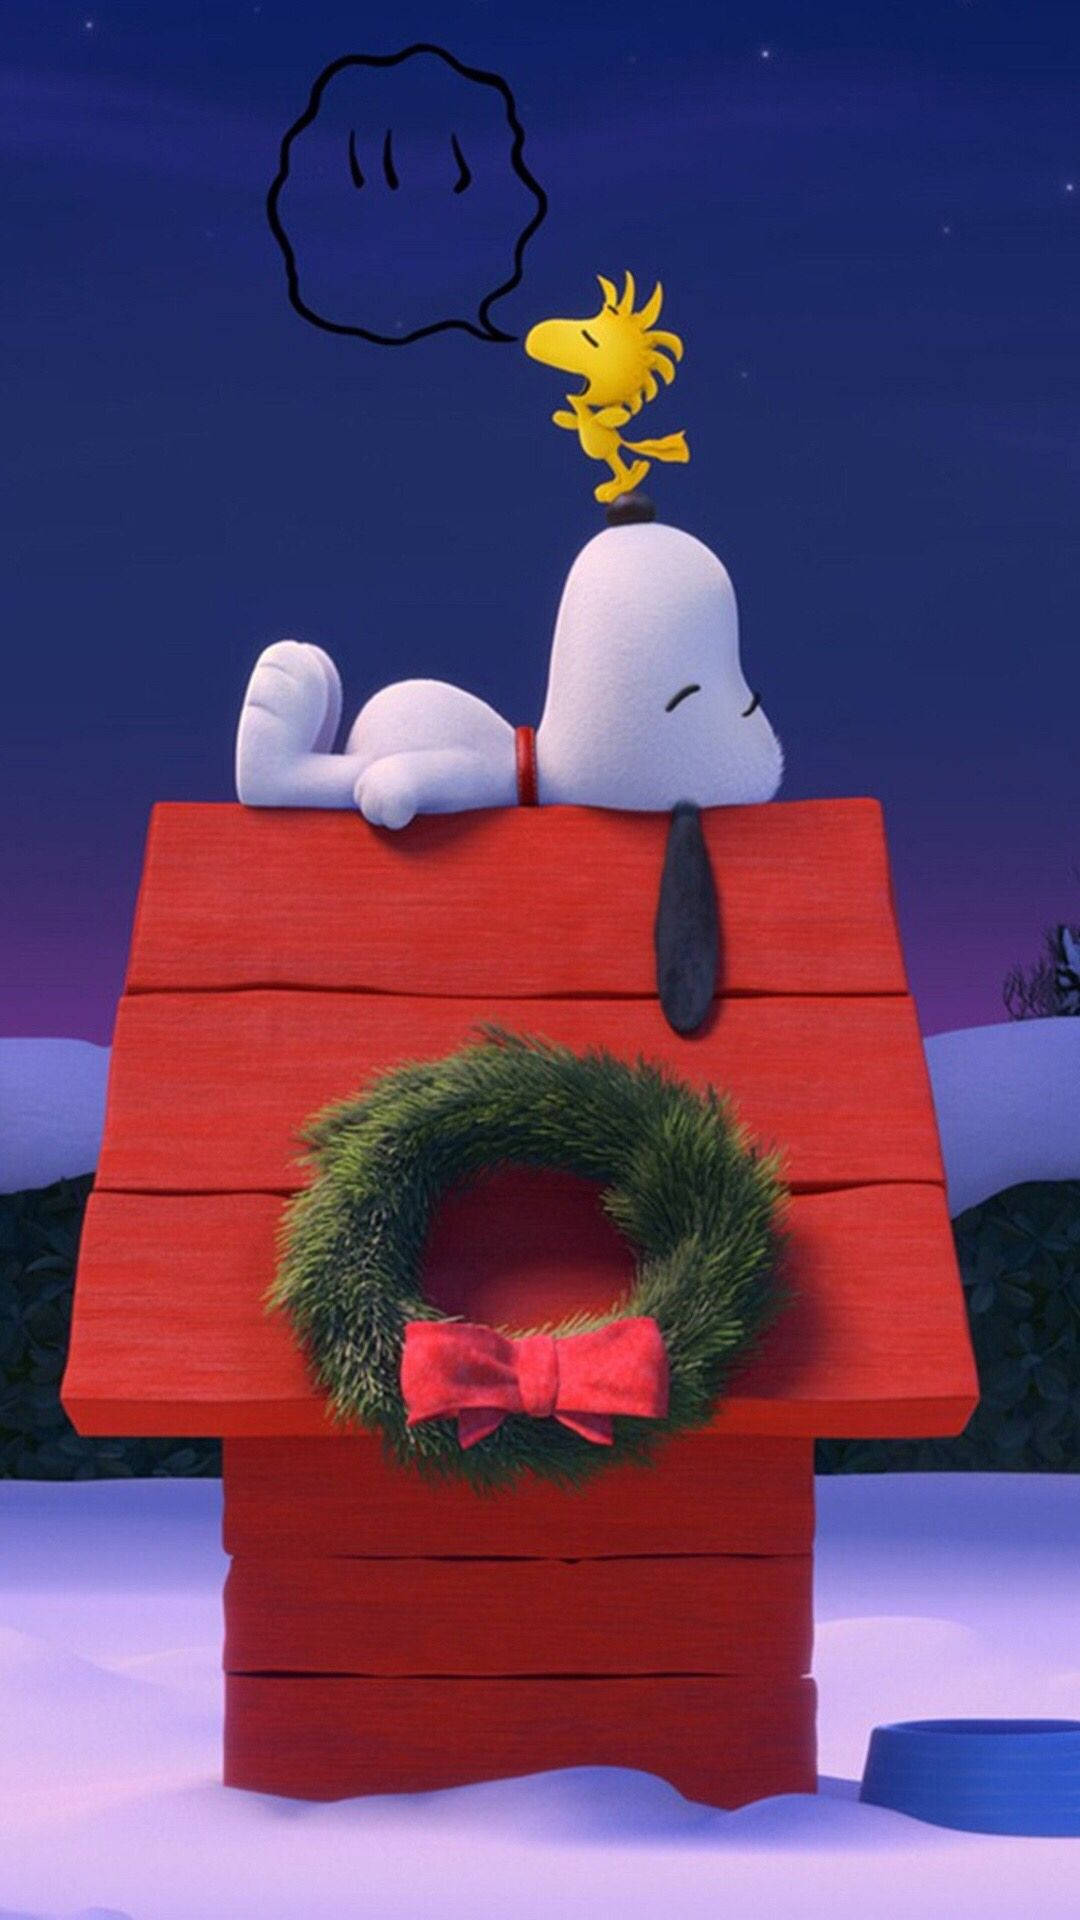 Snoopy 1080X1920 Wallpaper and Background Image